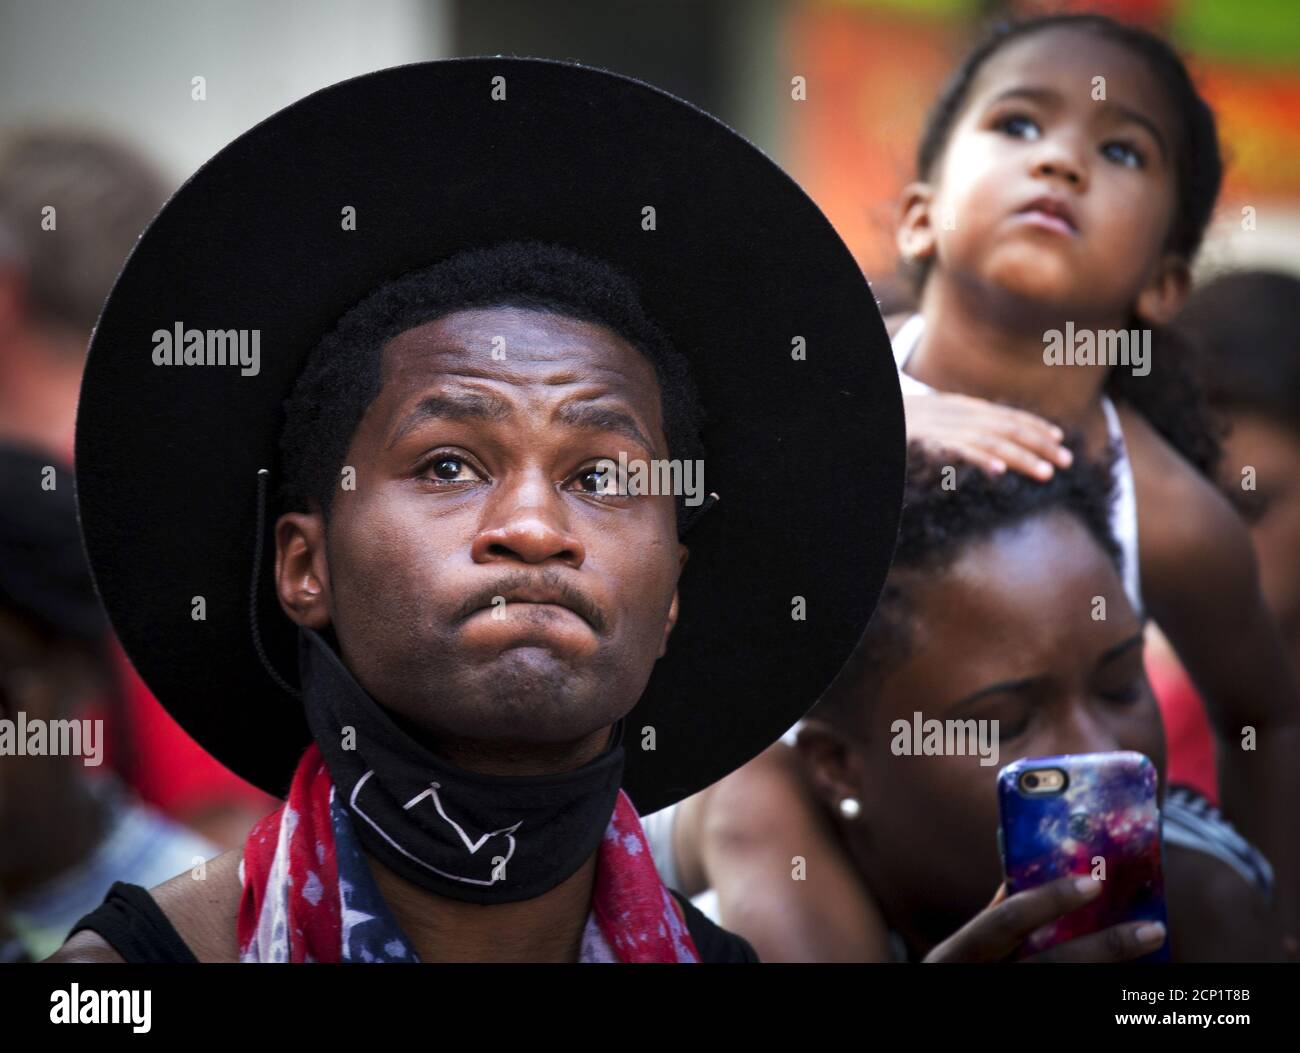 Singer Roman GianArthur takes part in 'Artists Take Fight Against Police Murders' in New York's Times Square August 13, 2015.  REUTERS/Brendan McDermid Stock Photo